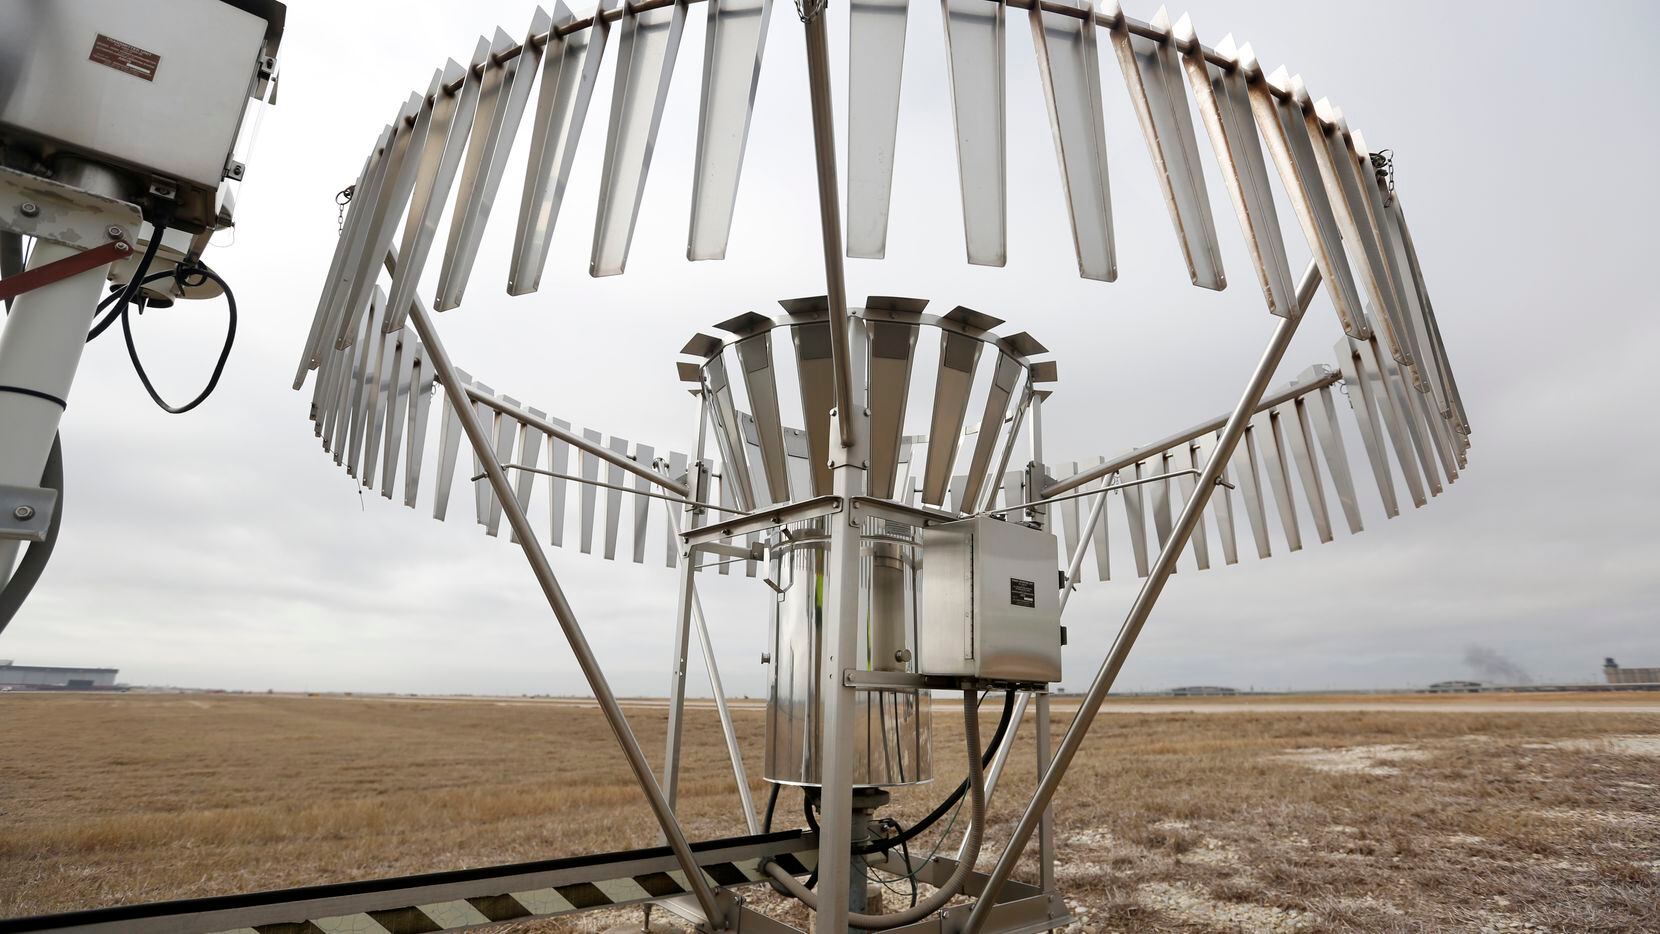 The National Weather Service's rain gauge at the climate site at Dallas/Fort Worth International Airport in Irving, Texas on Tuesday, Feb. 26, 2019. (Rose Baca/Staff Photographer)